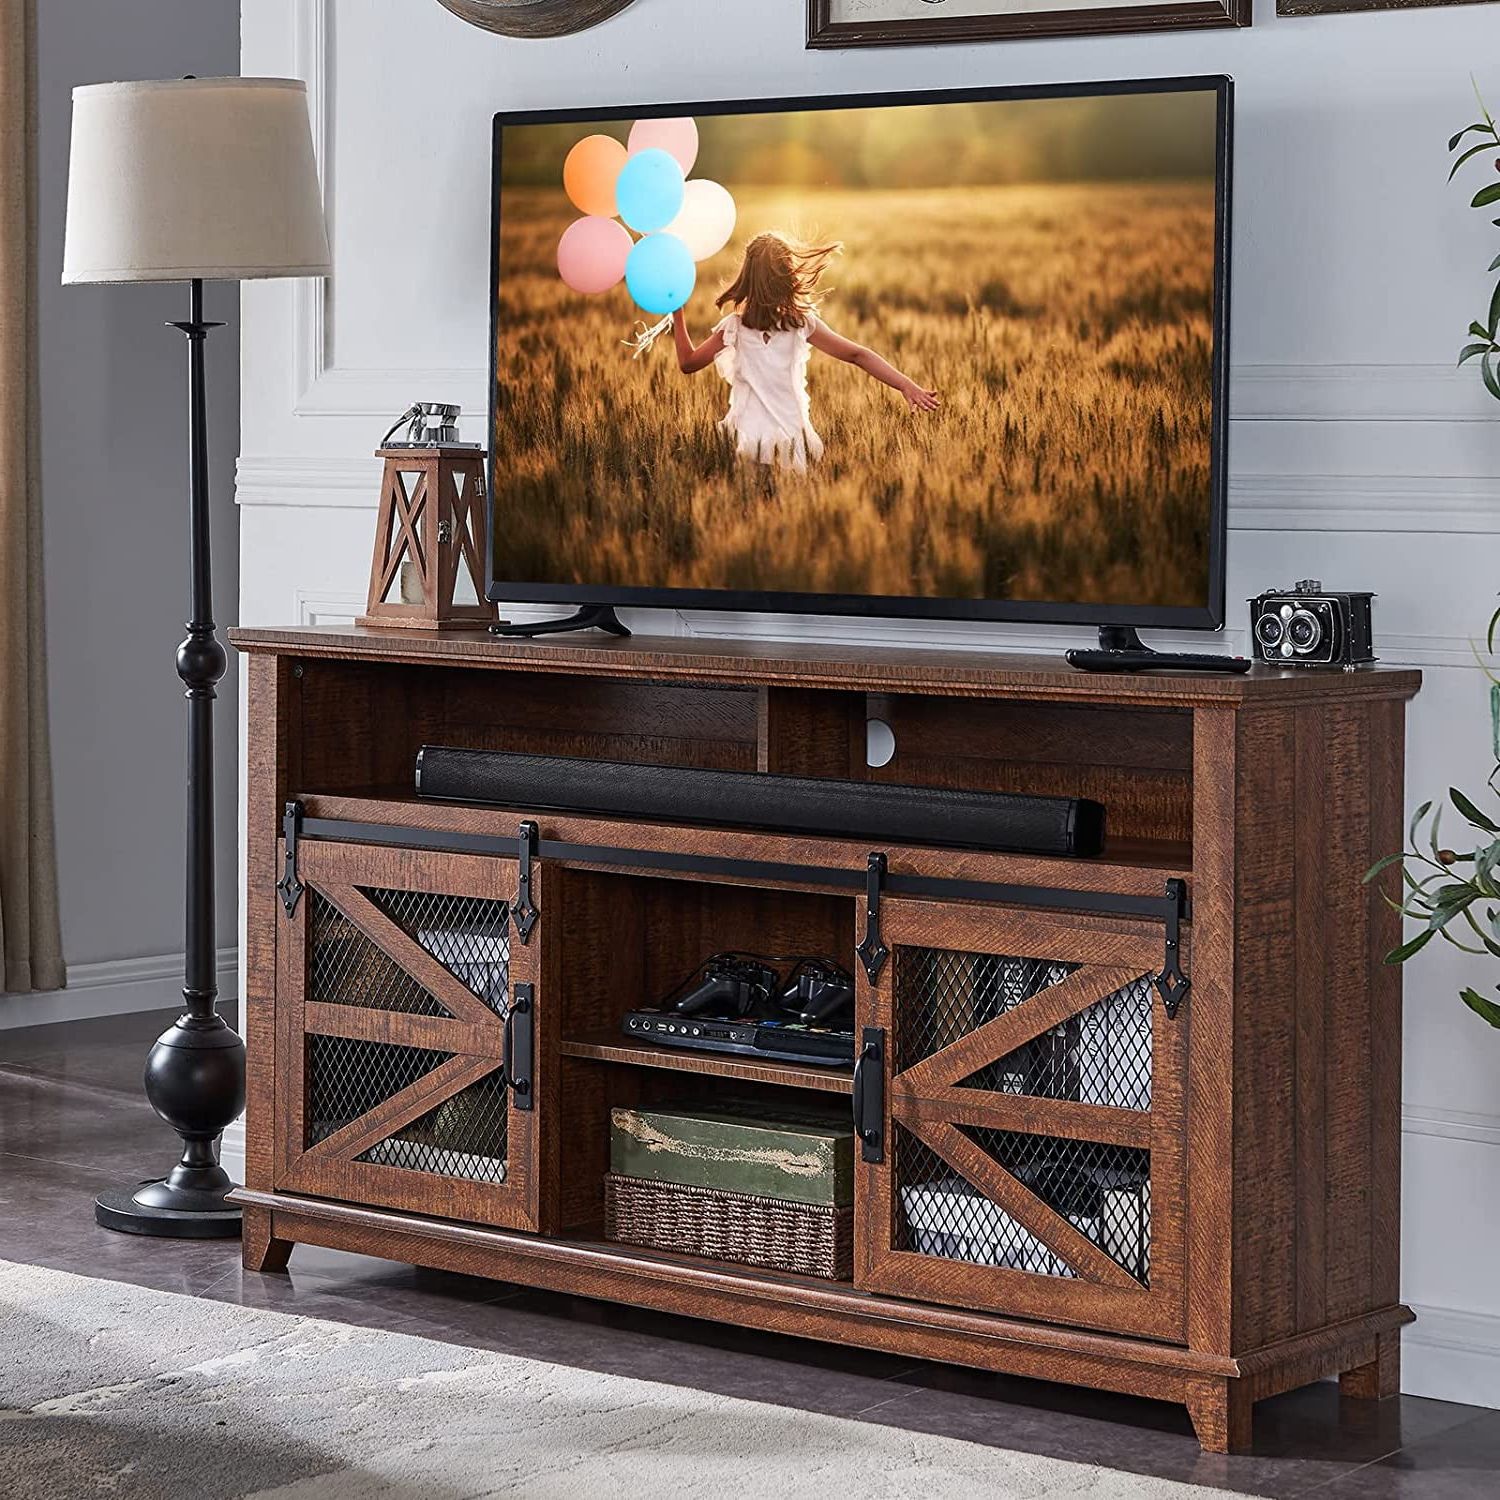 Okd Farmhouse Tv Stand For 65+ Inch Tv, Industrial Media Entertainment  Center, Reclaimed Barnwood – Walmart Intended For Farmhouse Media Entertainment Centers (Gallery 10 of 20)